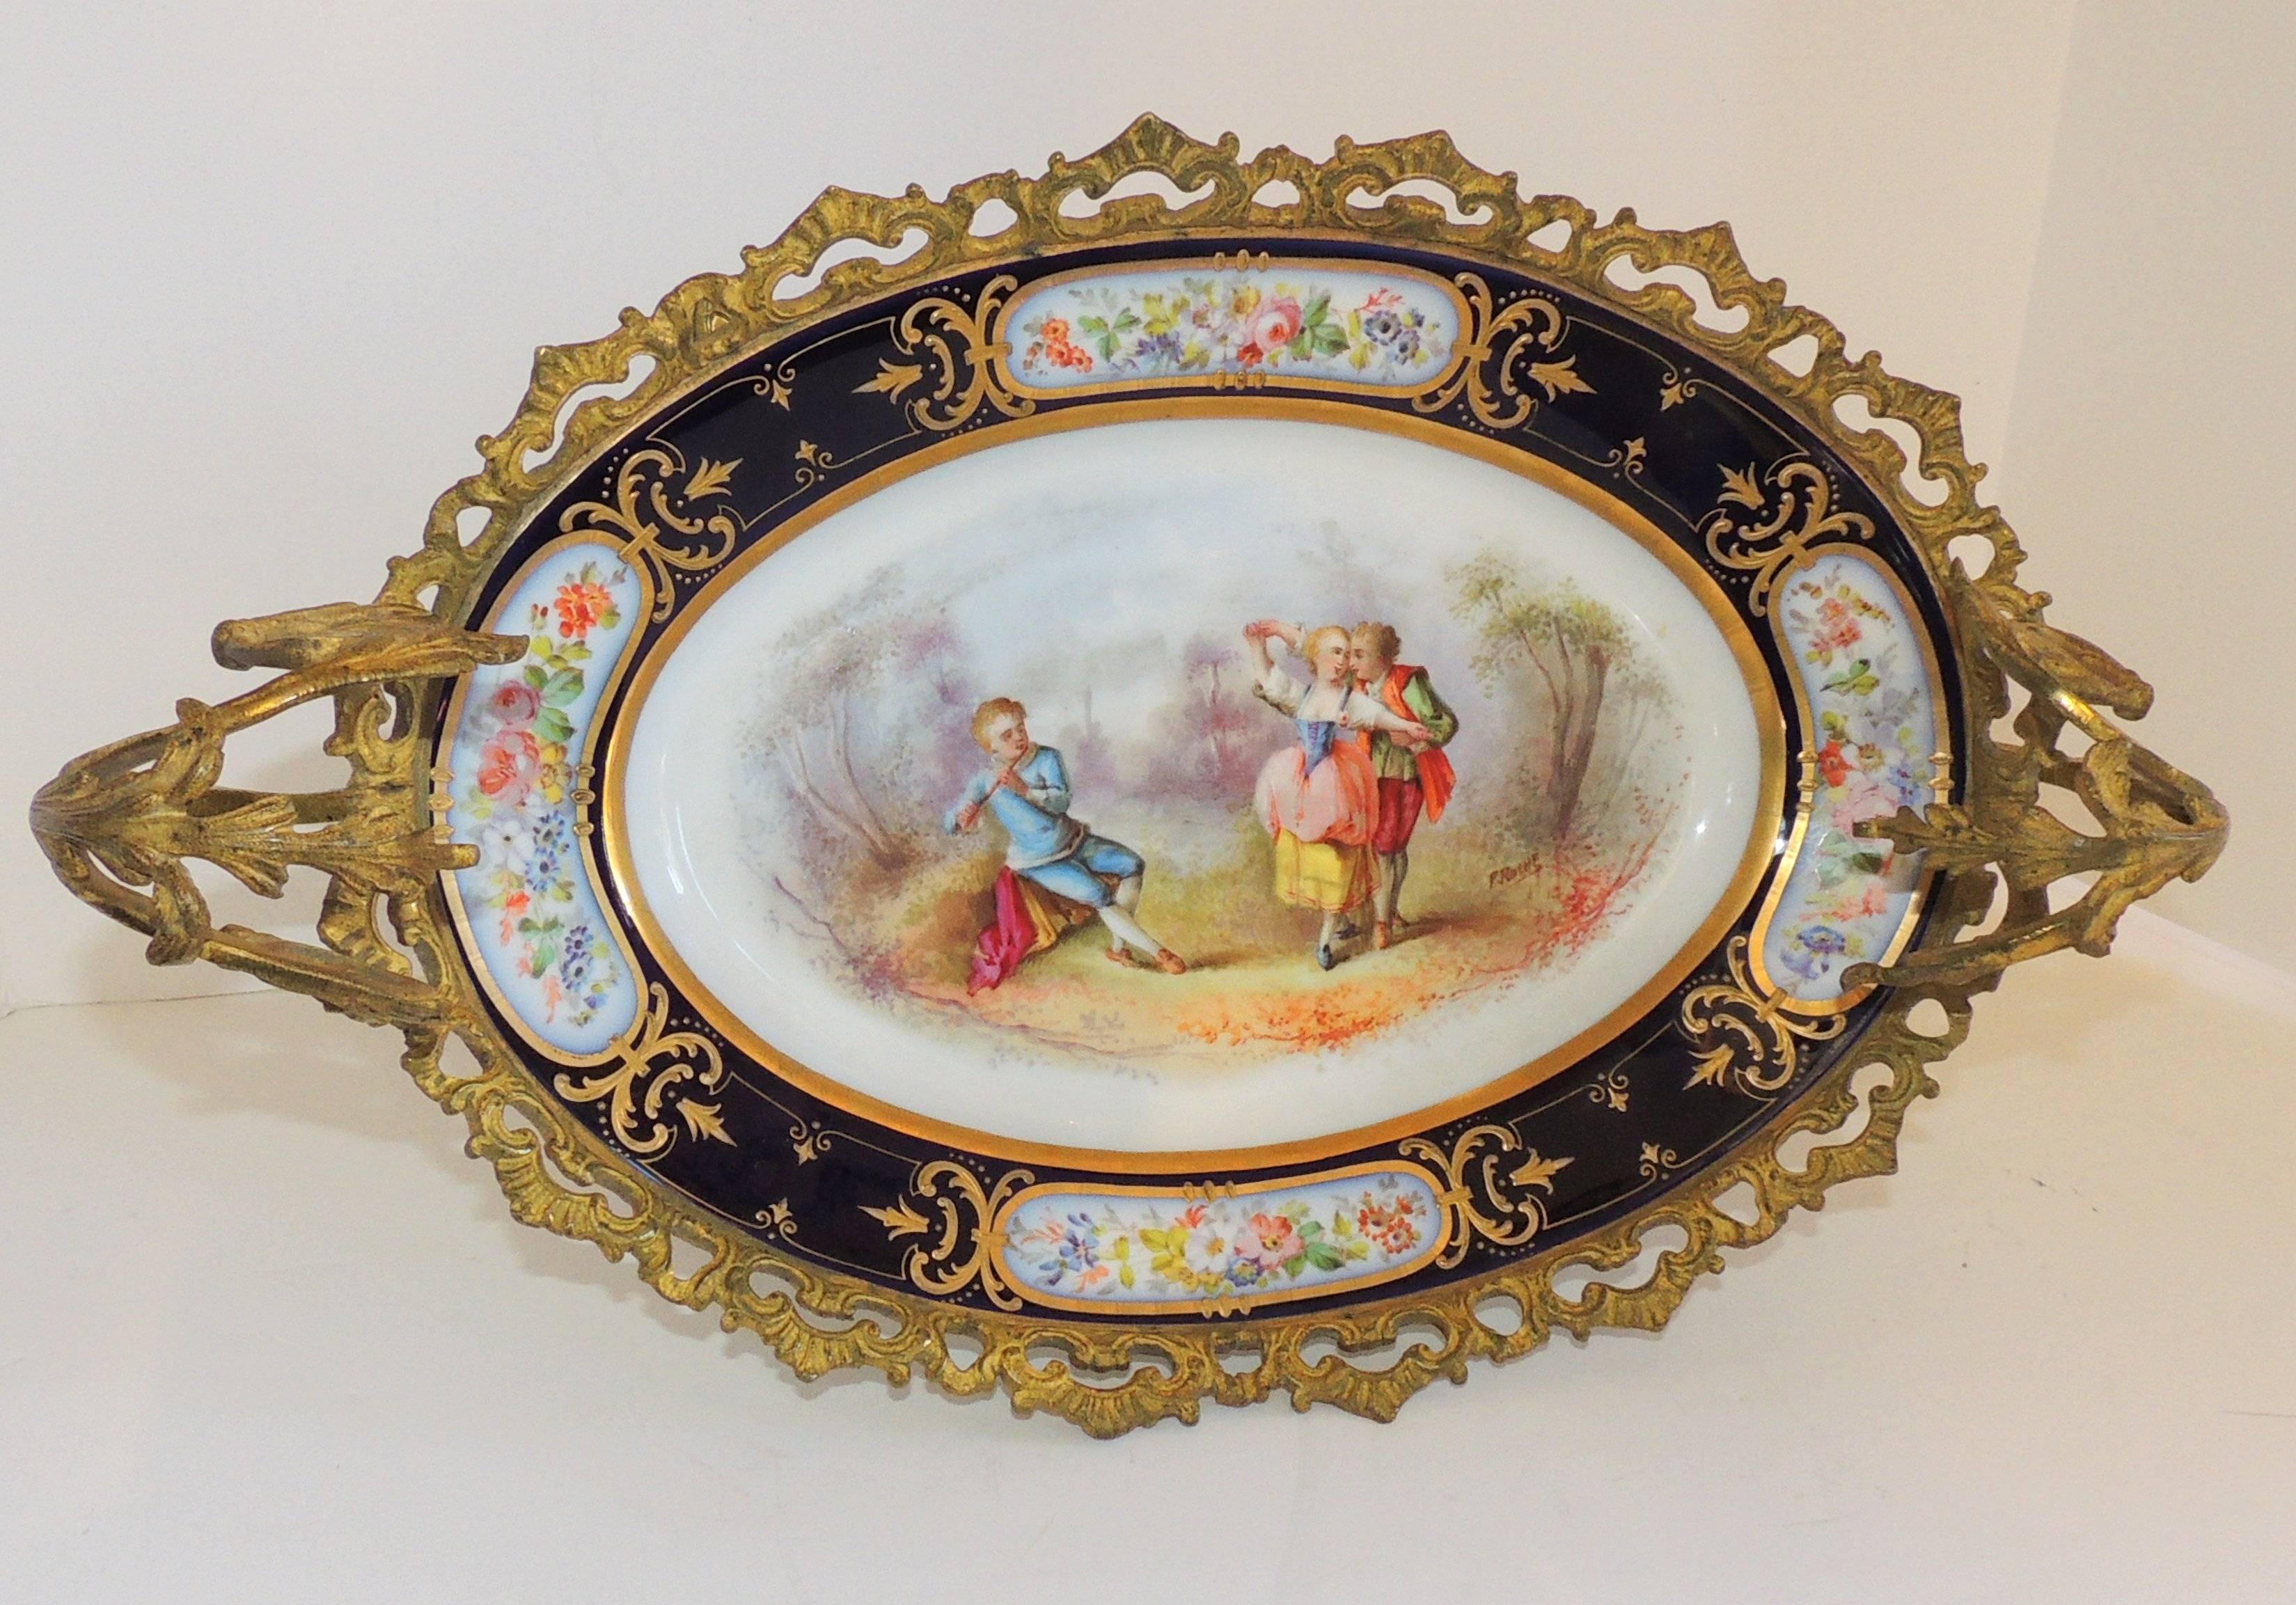 Wonderful French Ormolu bronze sevres hand-painted porcelain centerpiece tray.

Measures: 17.5